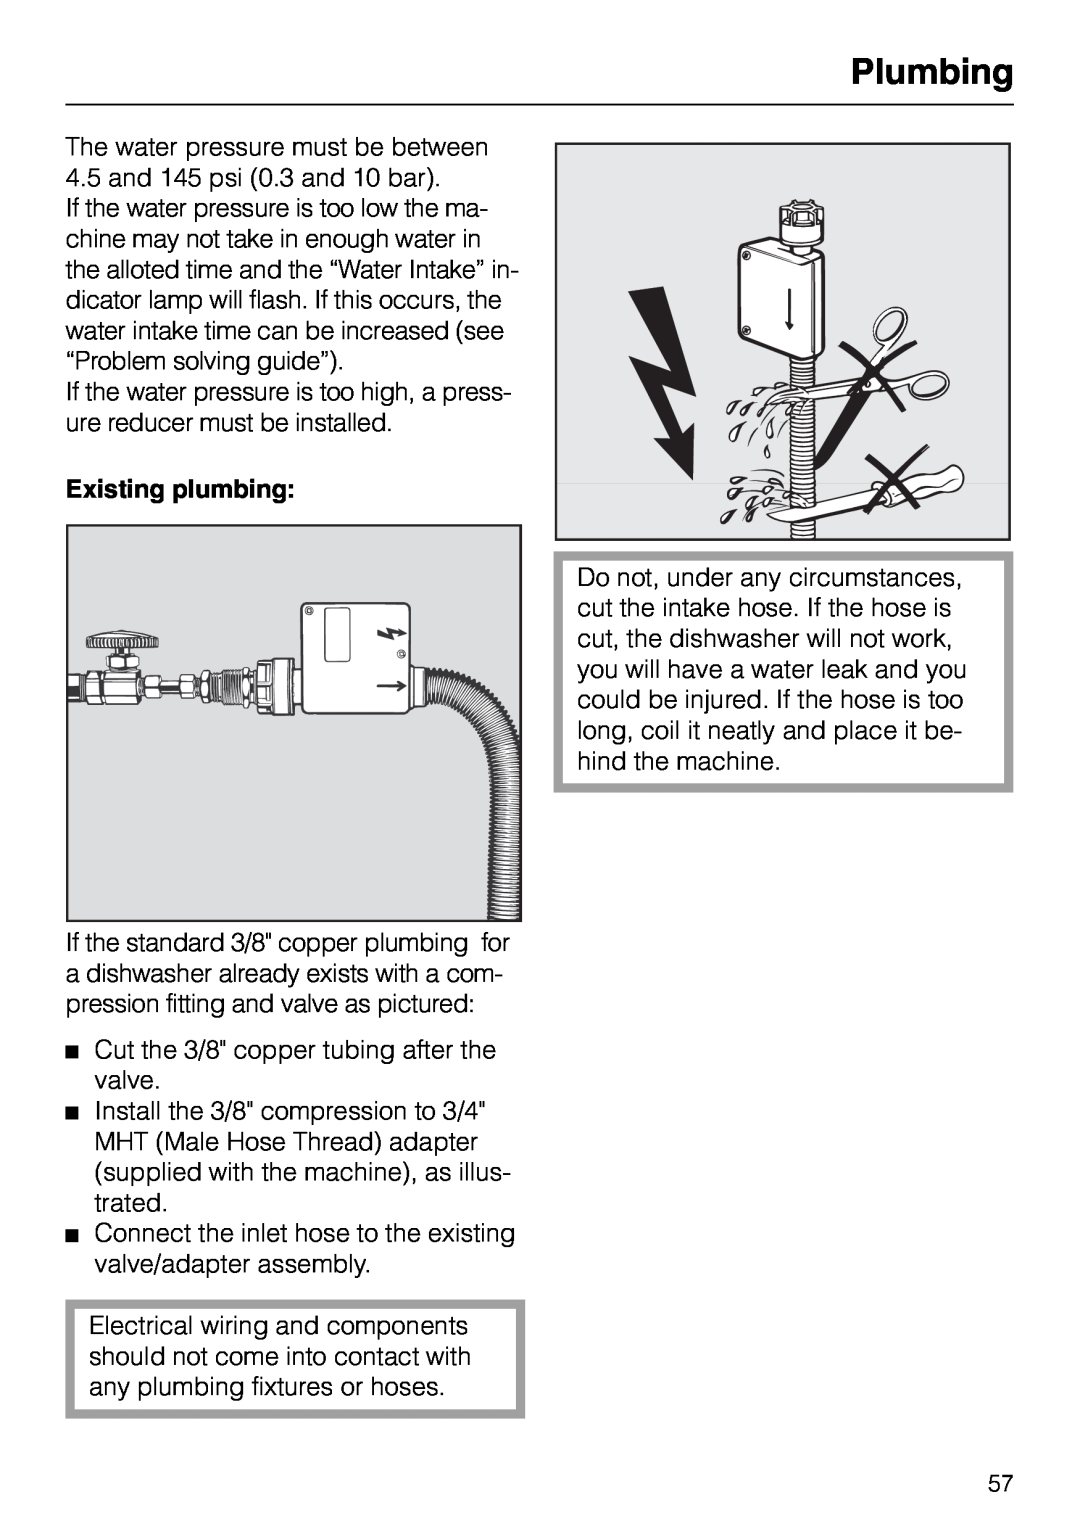 Miele M.-NR. 04 390 922 operating instructions Plumbing, Existing plumbing 